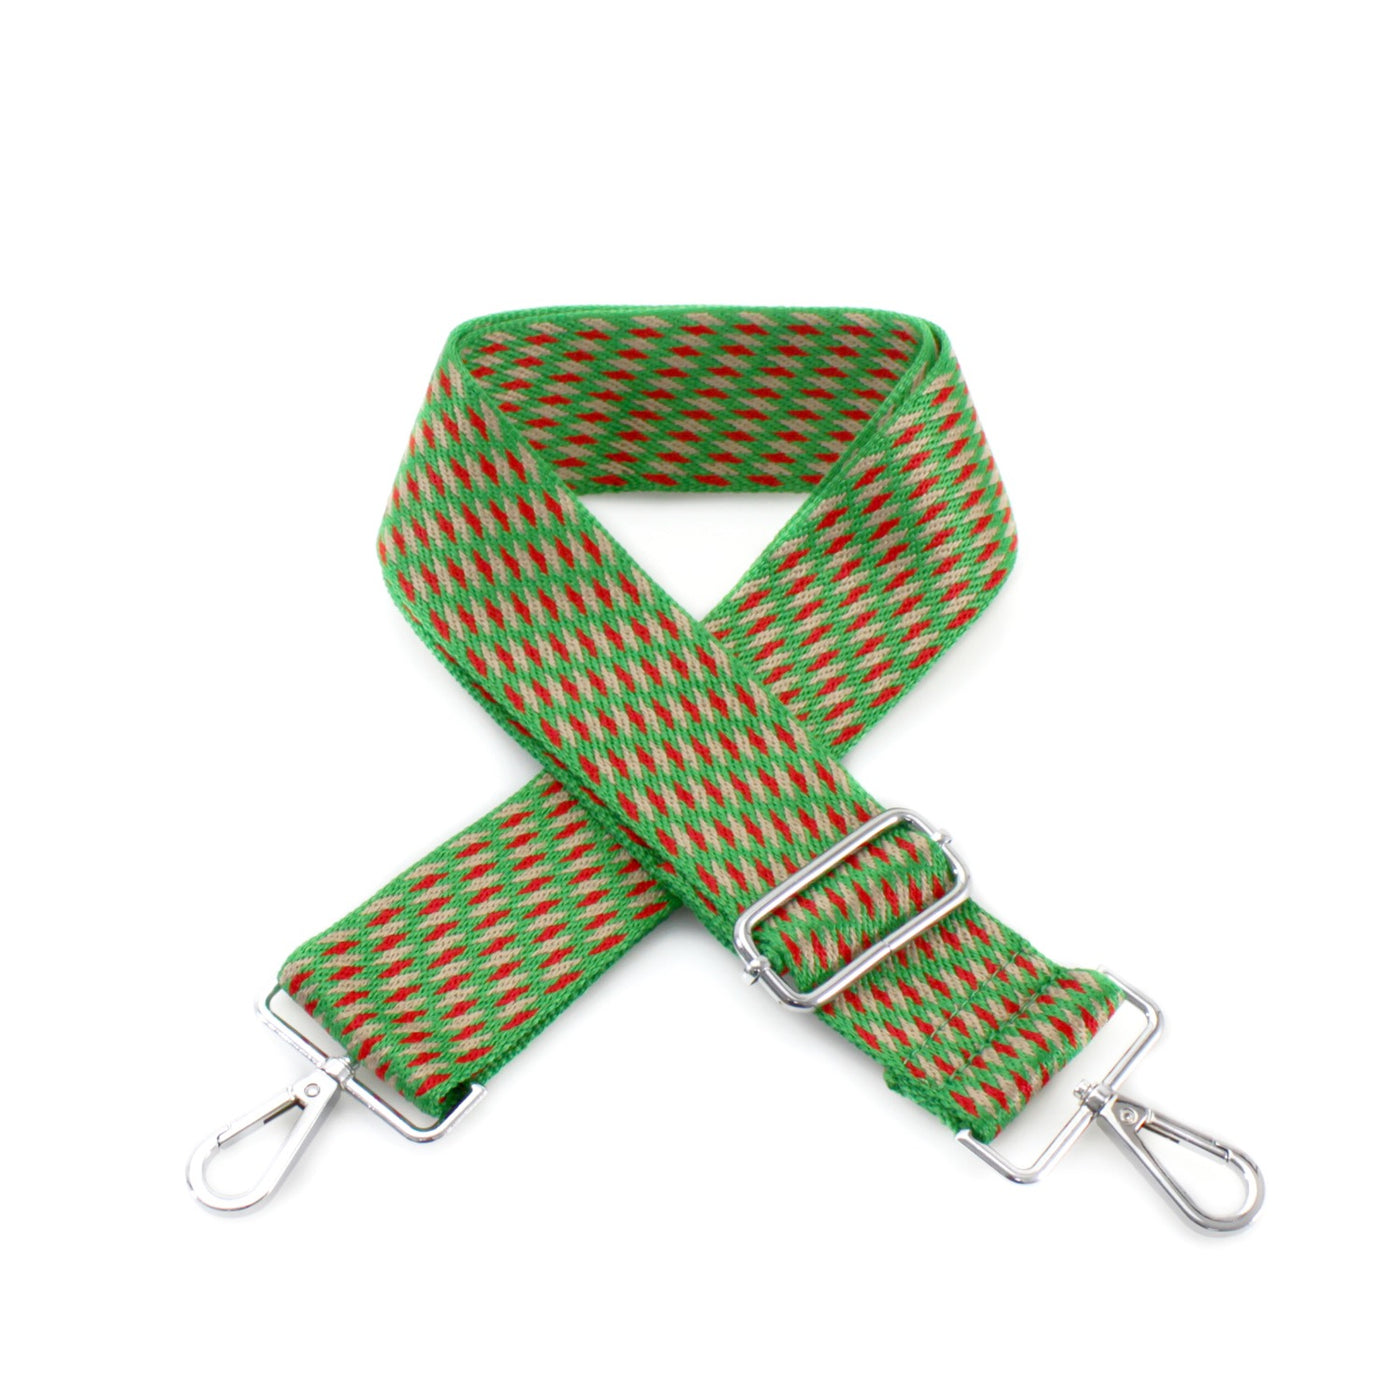 Green/Red Textured Print Bag Strap - with Silver Fittings